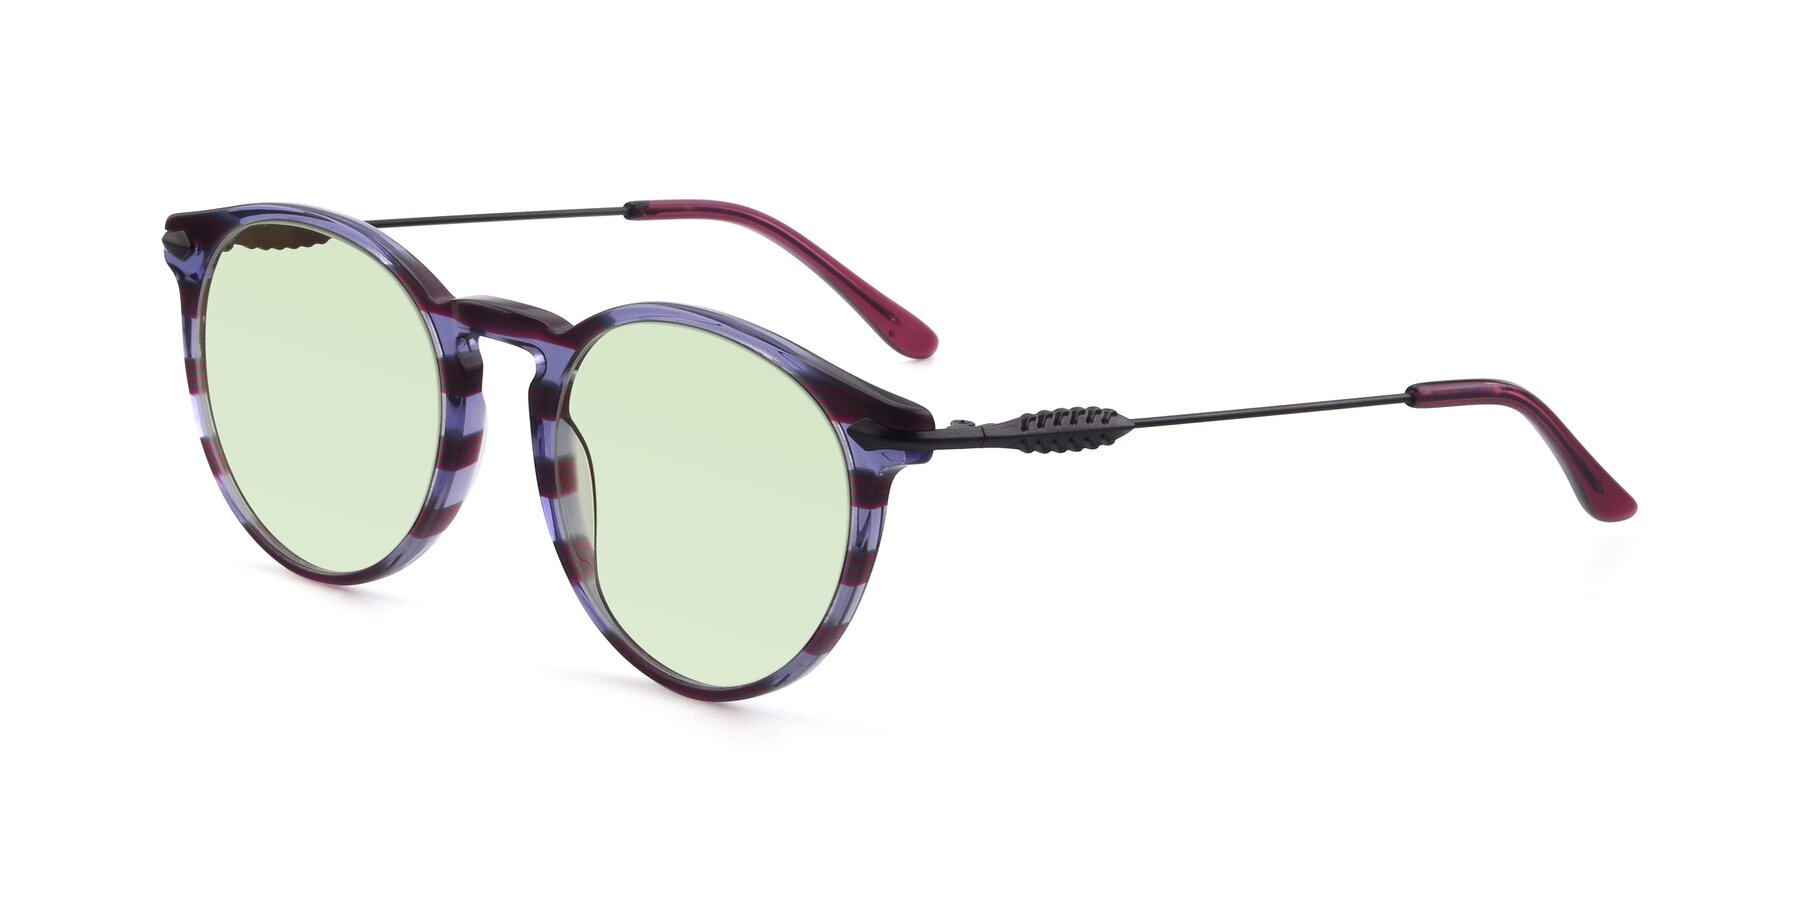 Angle of 17660 in Stripe Purple with Light Green Tinted Lenses